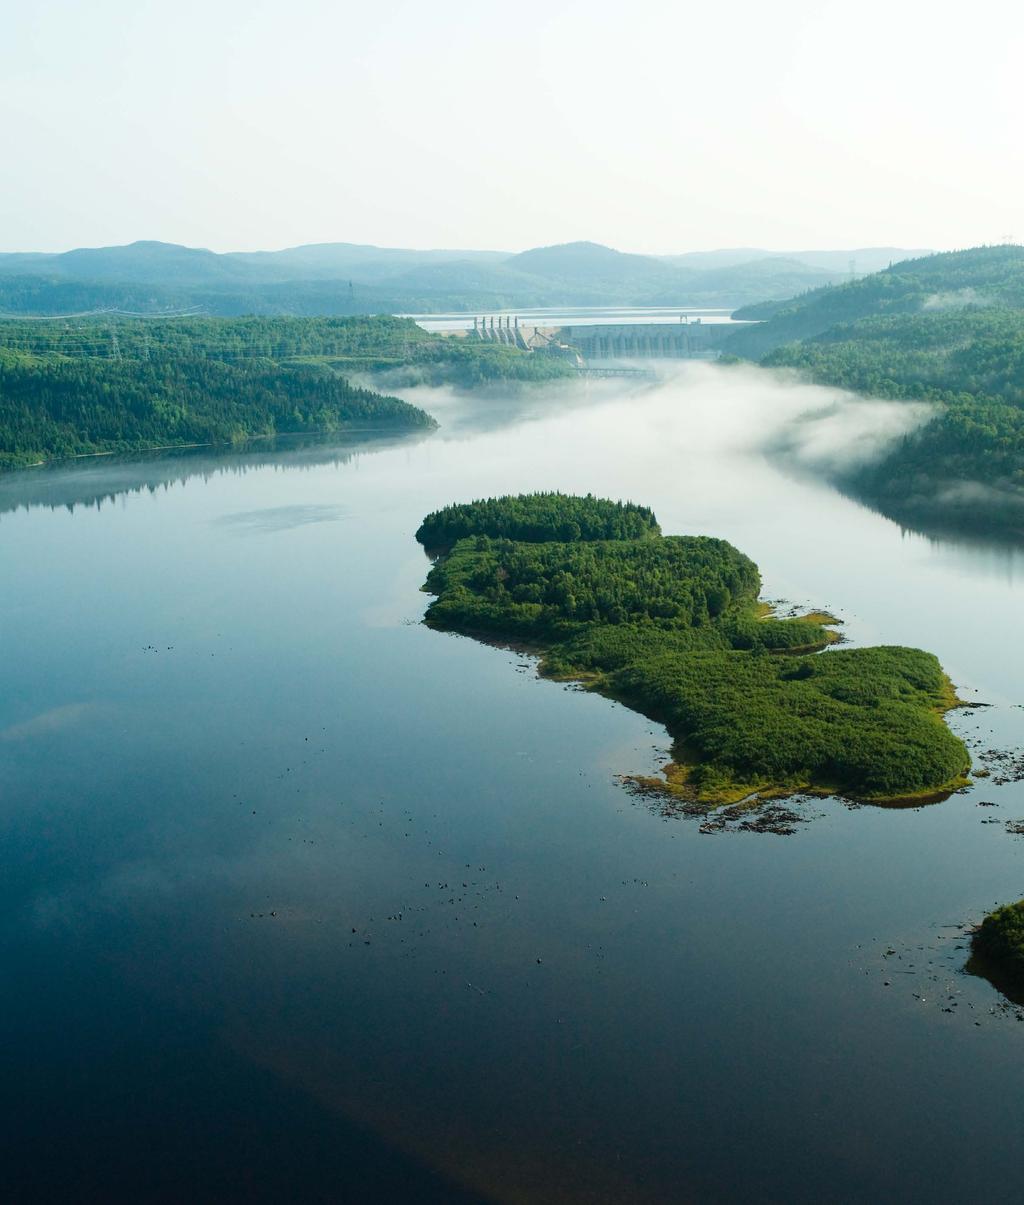 MORE CLEAN ENERGY; NEW, LASTING INFRASTRUCTURE Hydro-Québec has been providing power to New England for